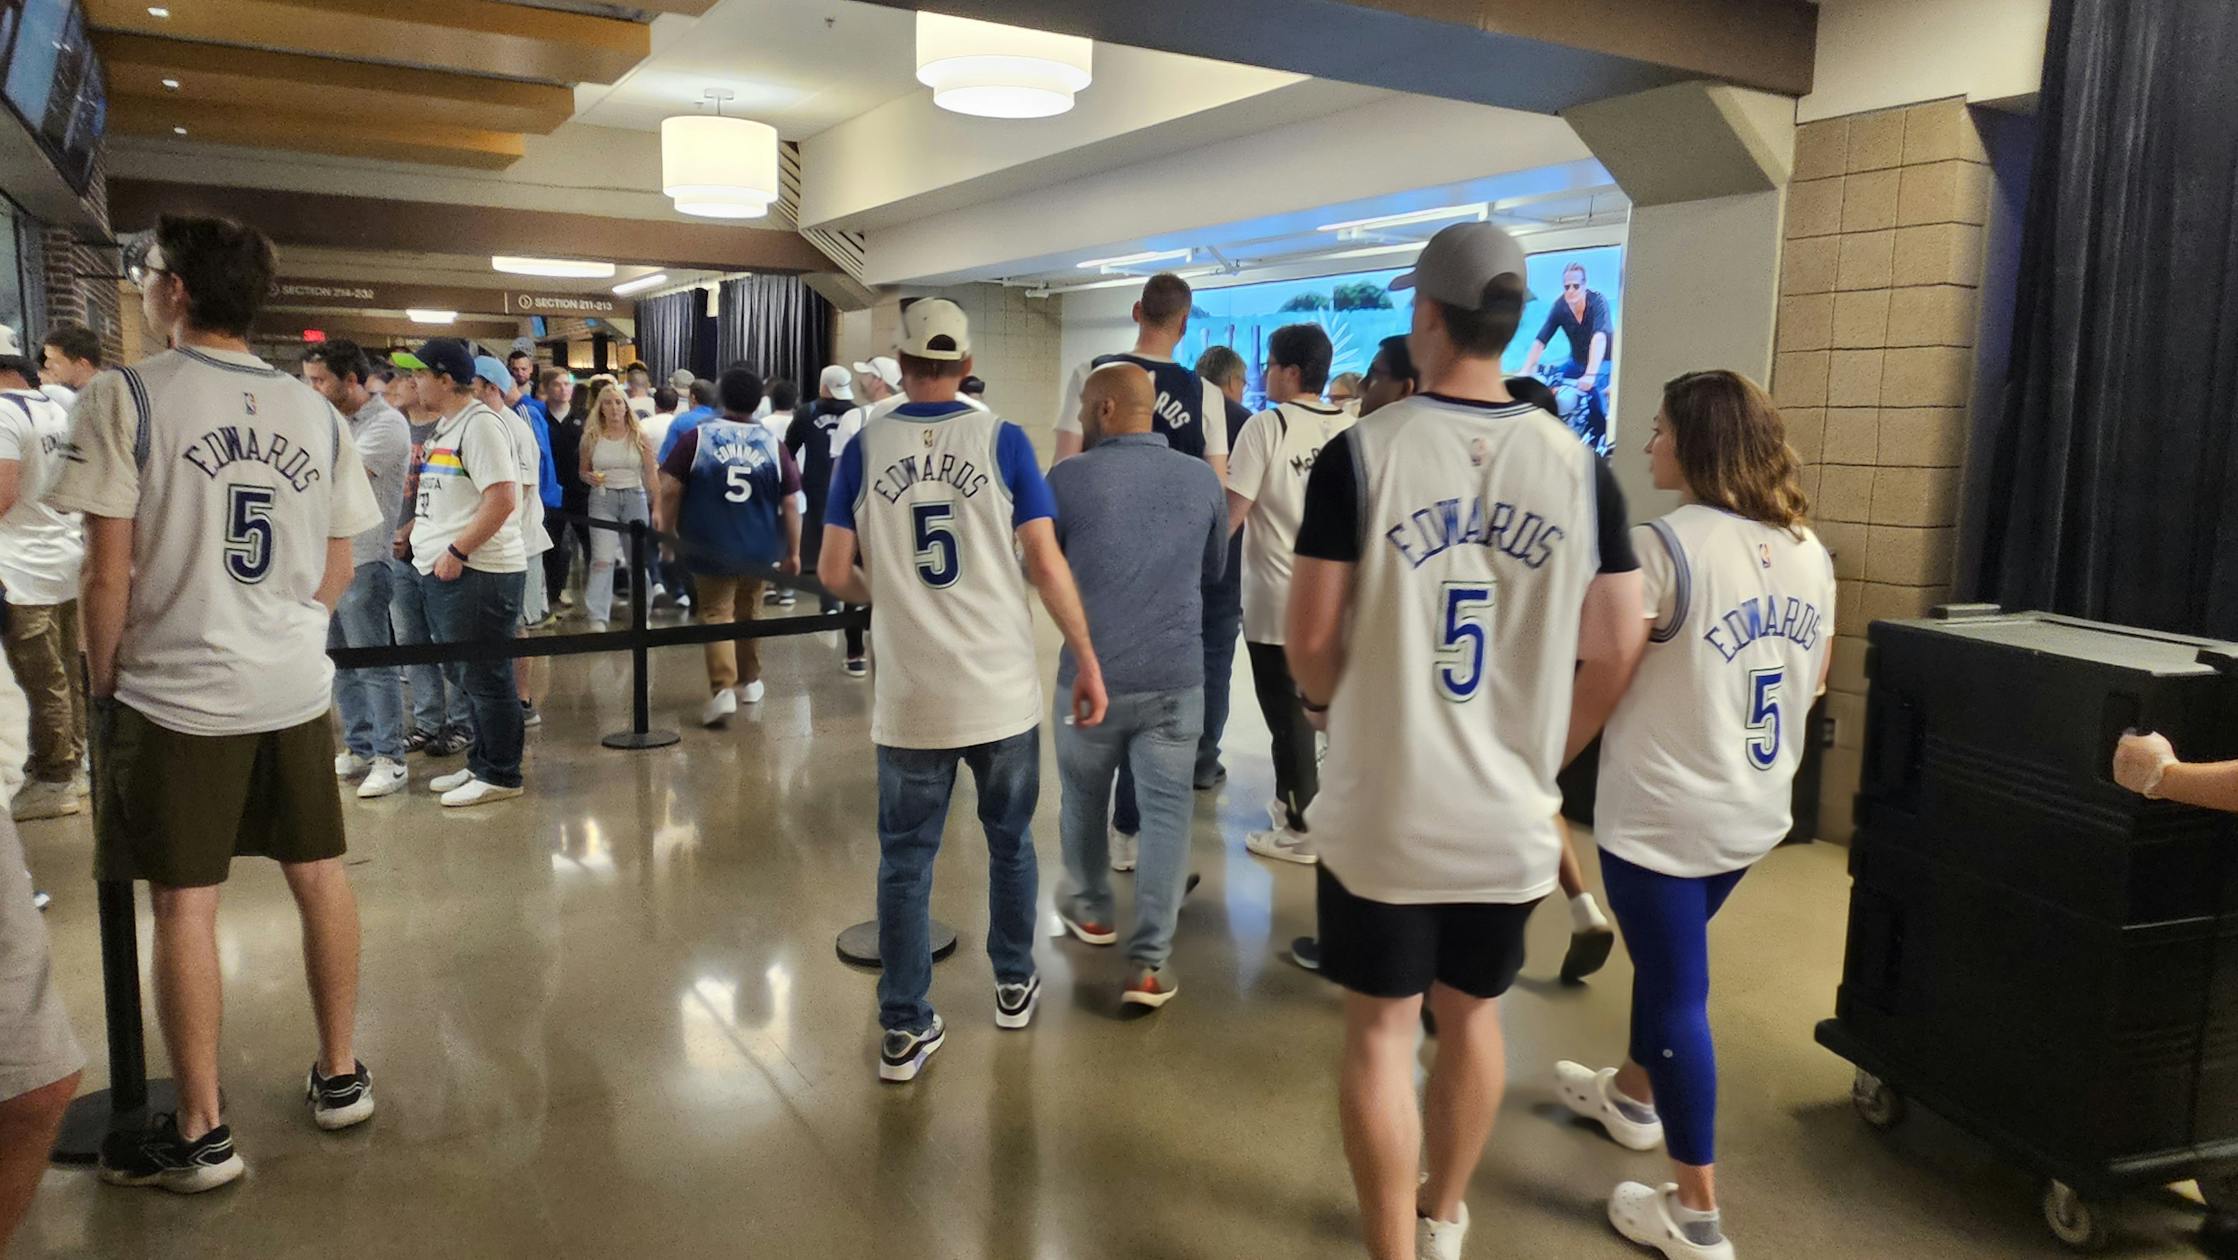 What did Timberwolves fans wear to the Western Conference finals?